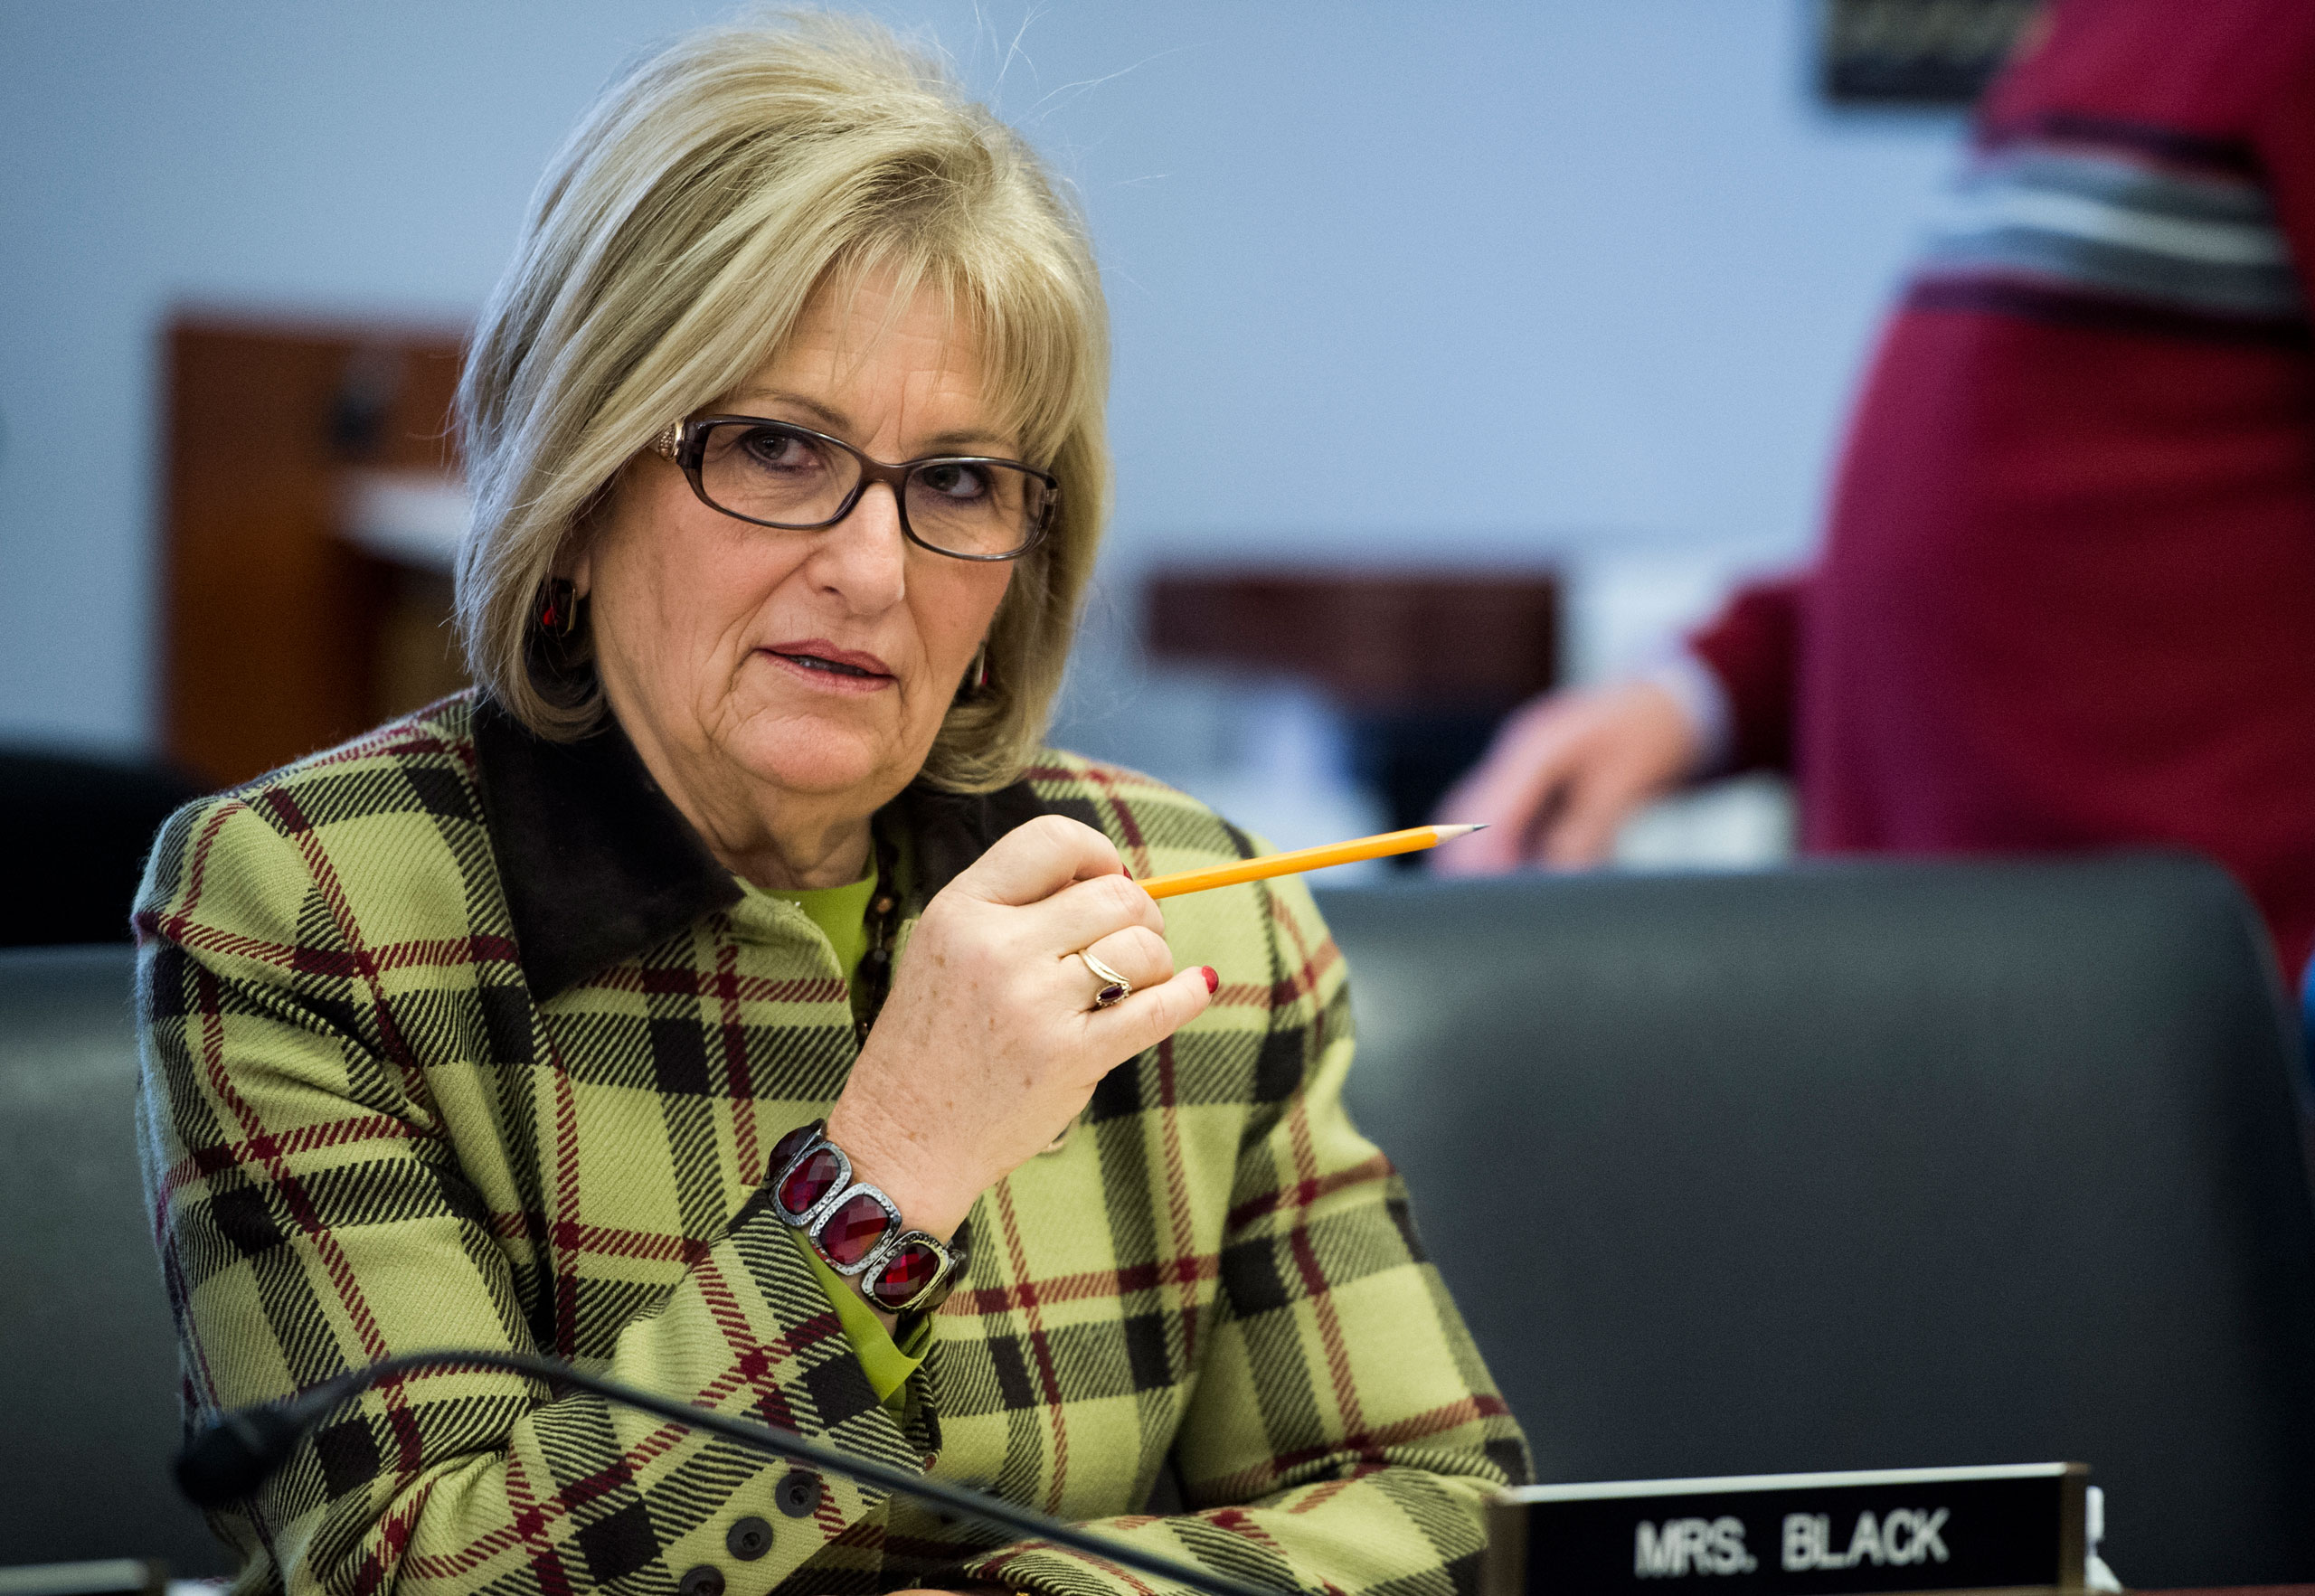 Rep. Diane Black takes her seat for the House Budget Committee hearing on "The Congressional Budget Office's (CBO) Budget and Economic Outlook" on  Jan. 27, 2015.